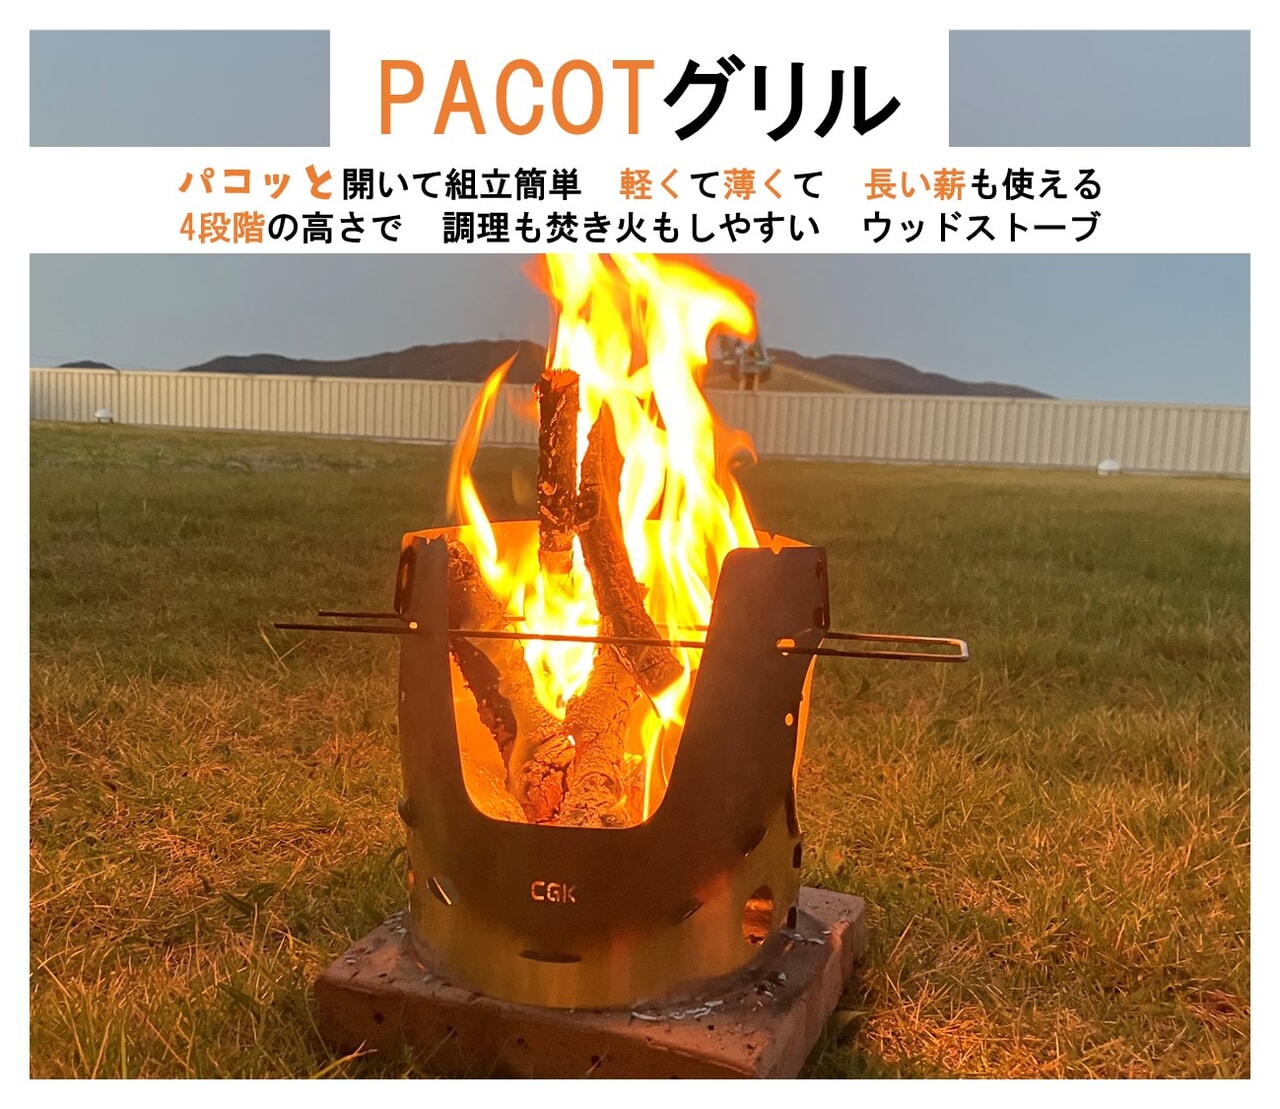 pacot202211